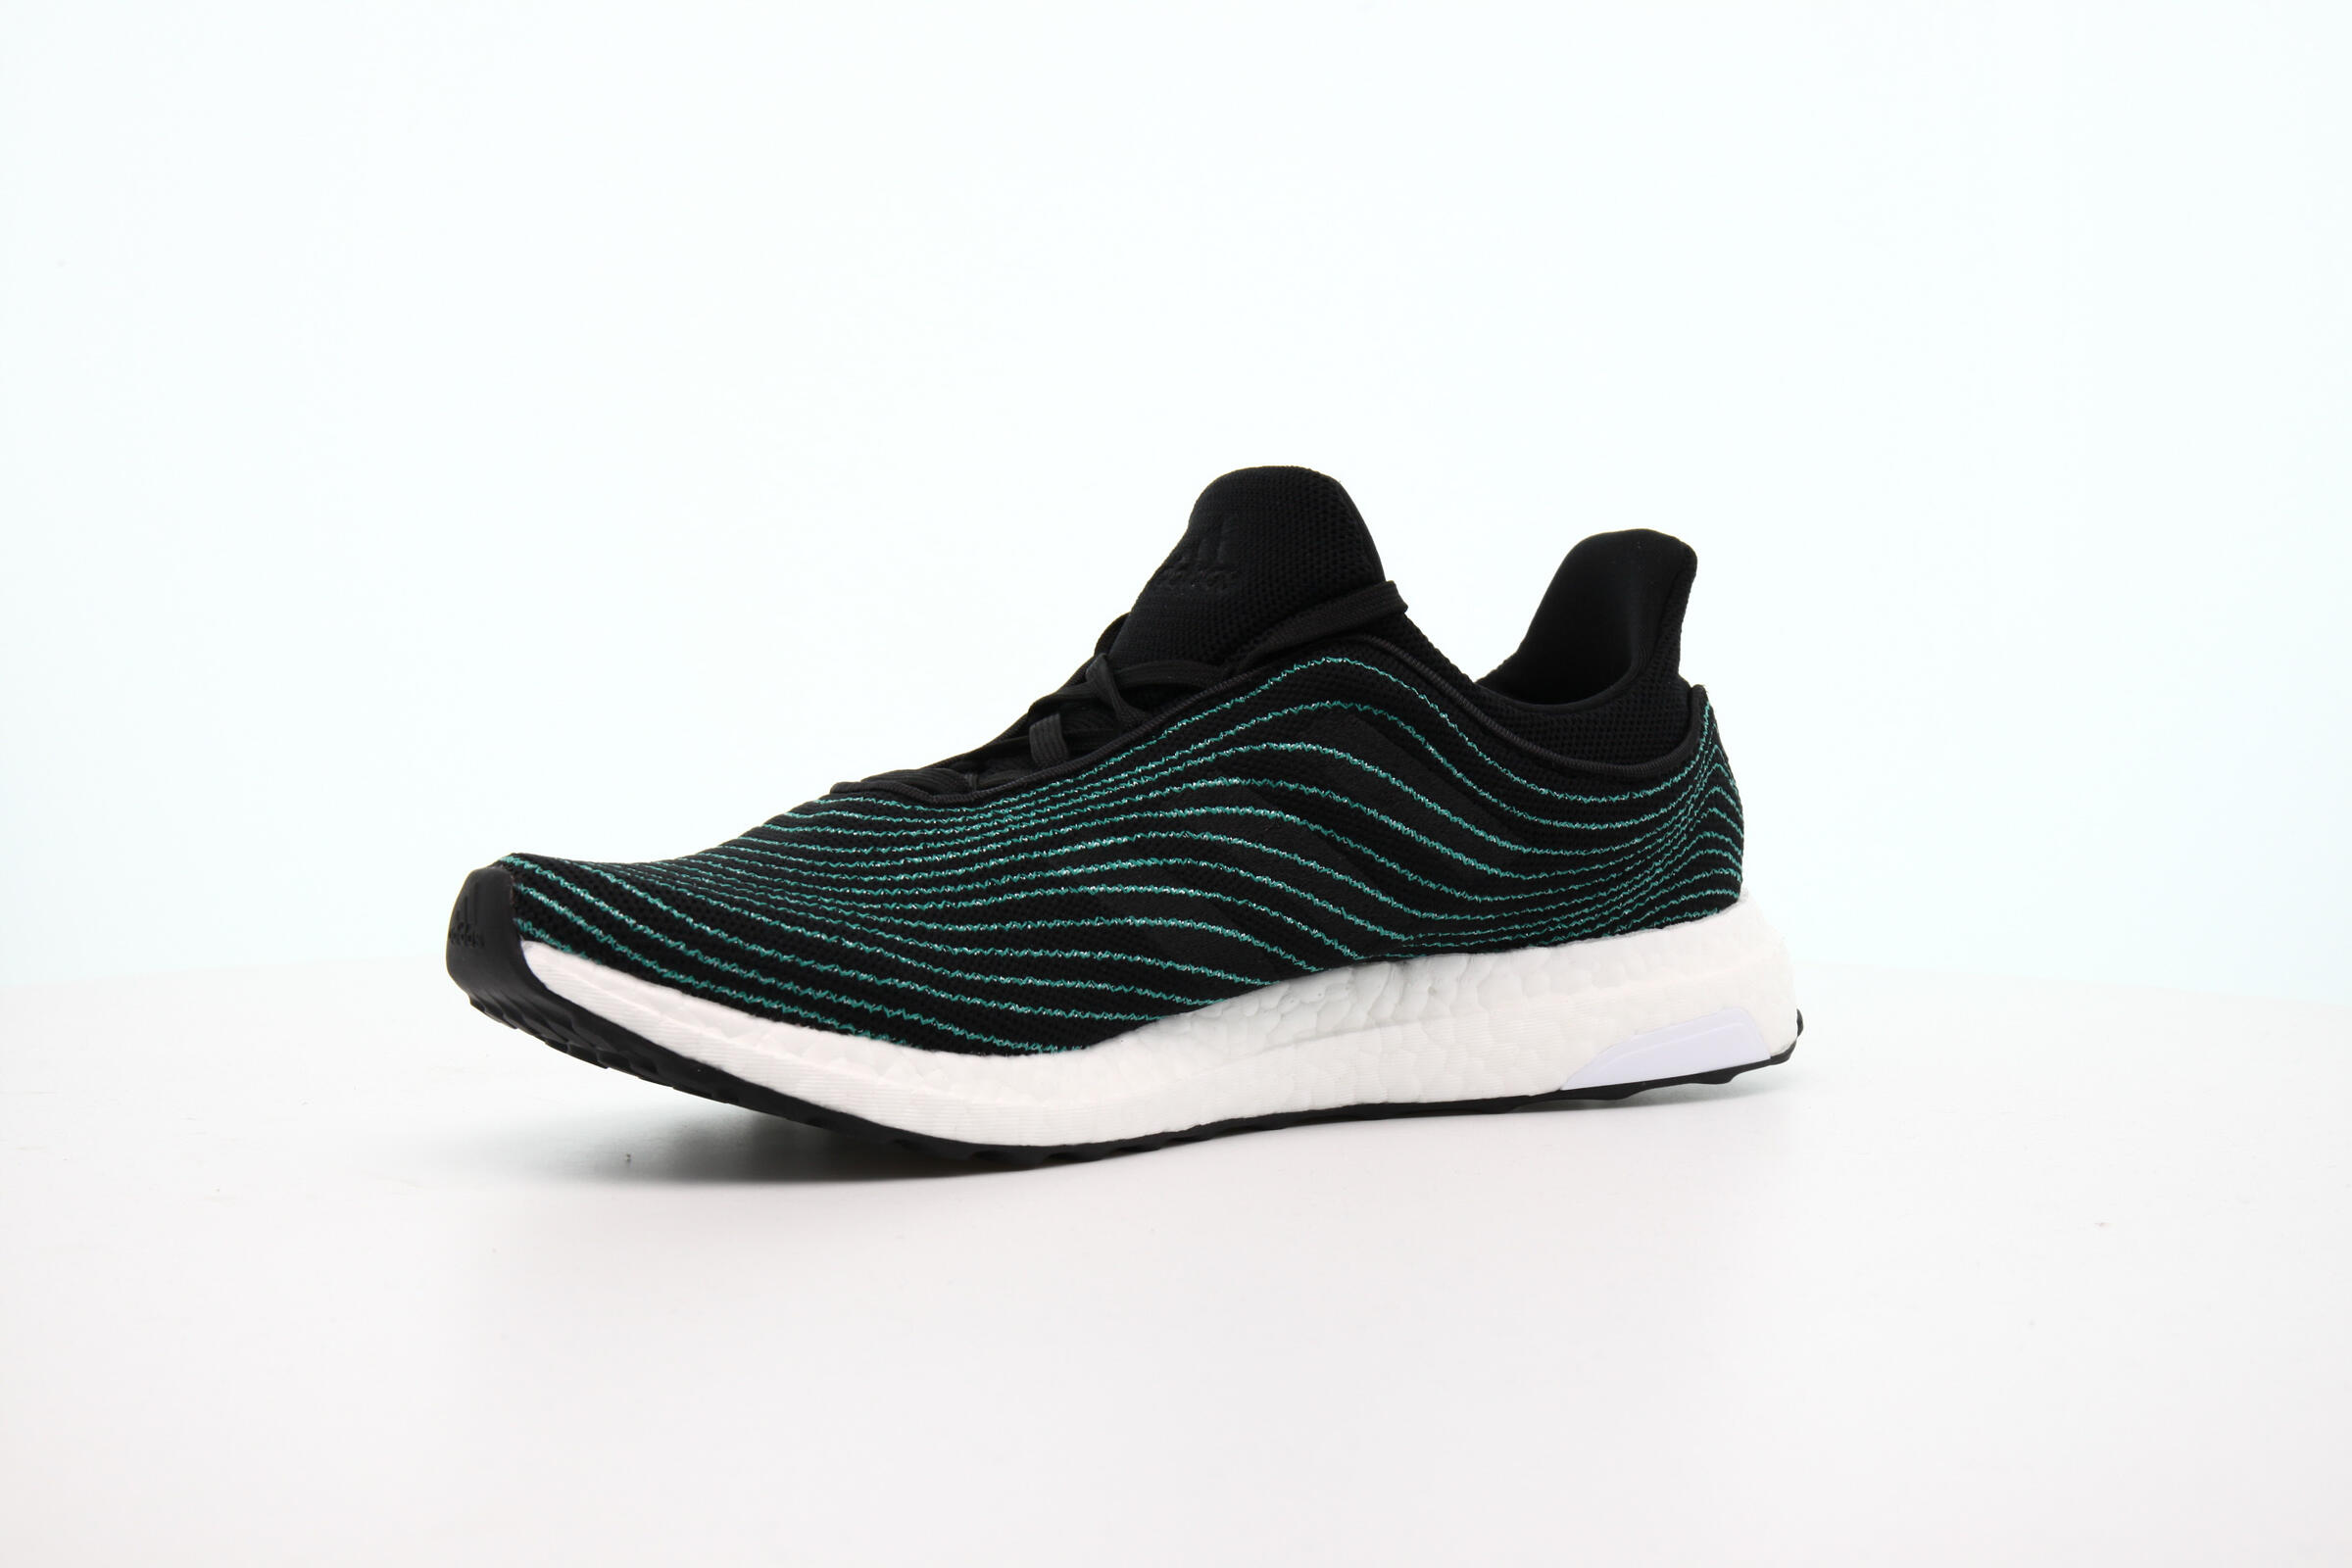 adidas Performance ULTRABOOST PARLEY UNCAGED "CORE BLACK"